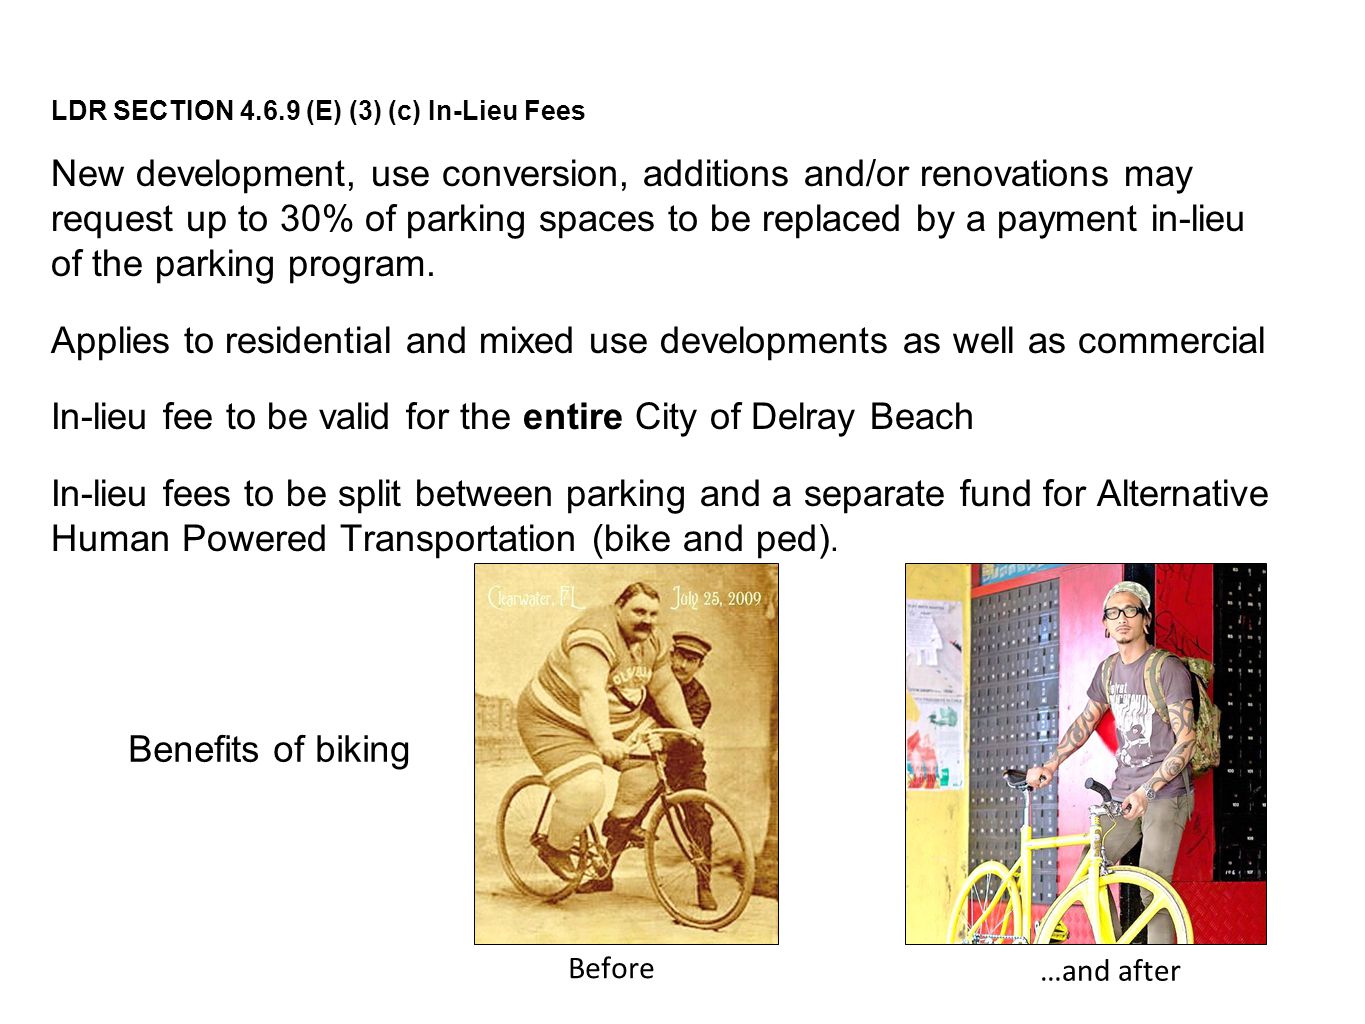 LDR SECTION (E) (3) (c) In-Lieu Fees New development, use conversion, additions and/or renovations may request up to 30% of parking spaces to be replaced by a payment in-lieu of the parking program.